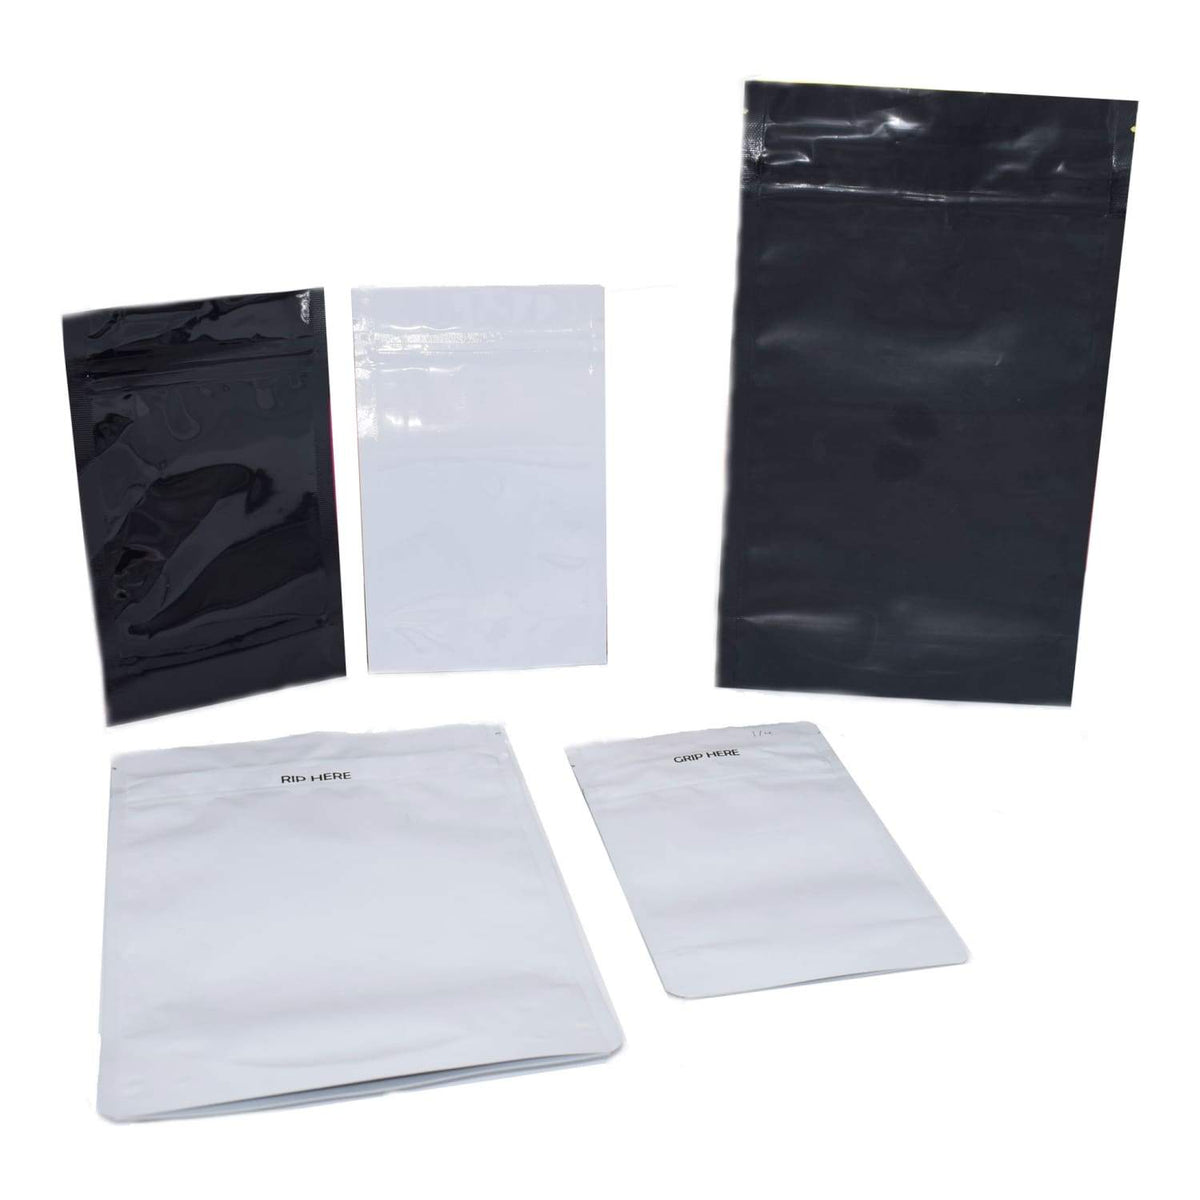  PABCK 500 Pack Mylar Foil Small Pouch 2x2.8 inches